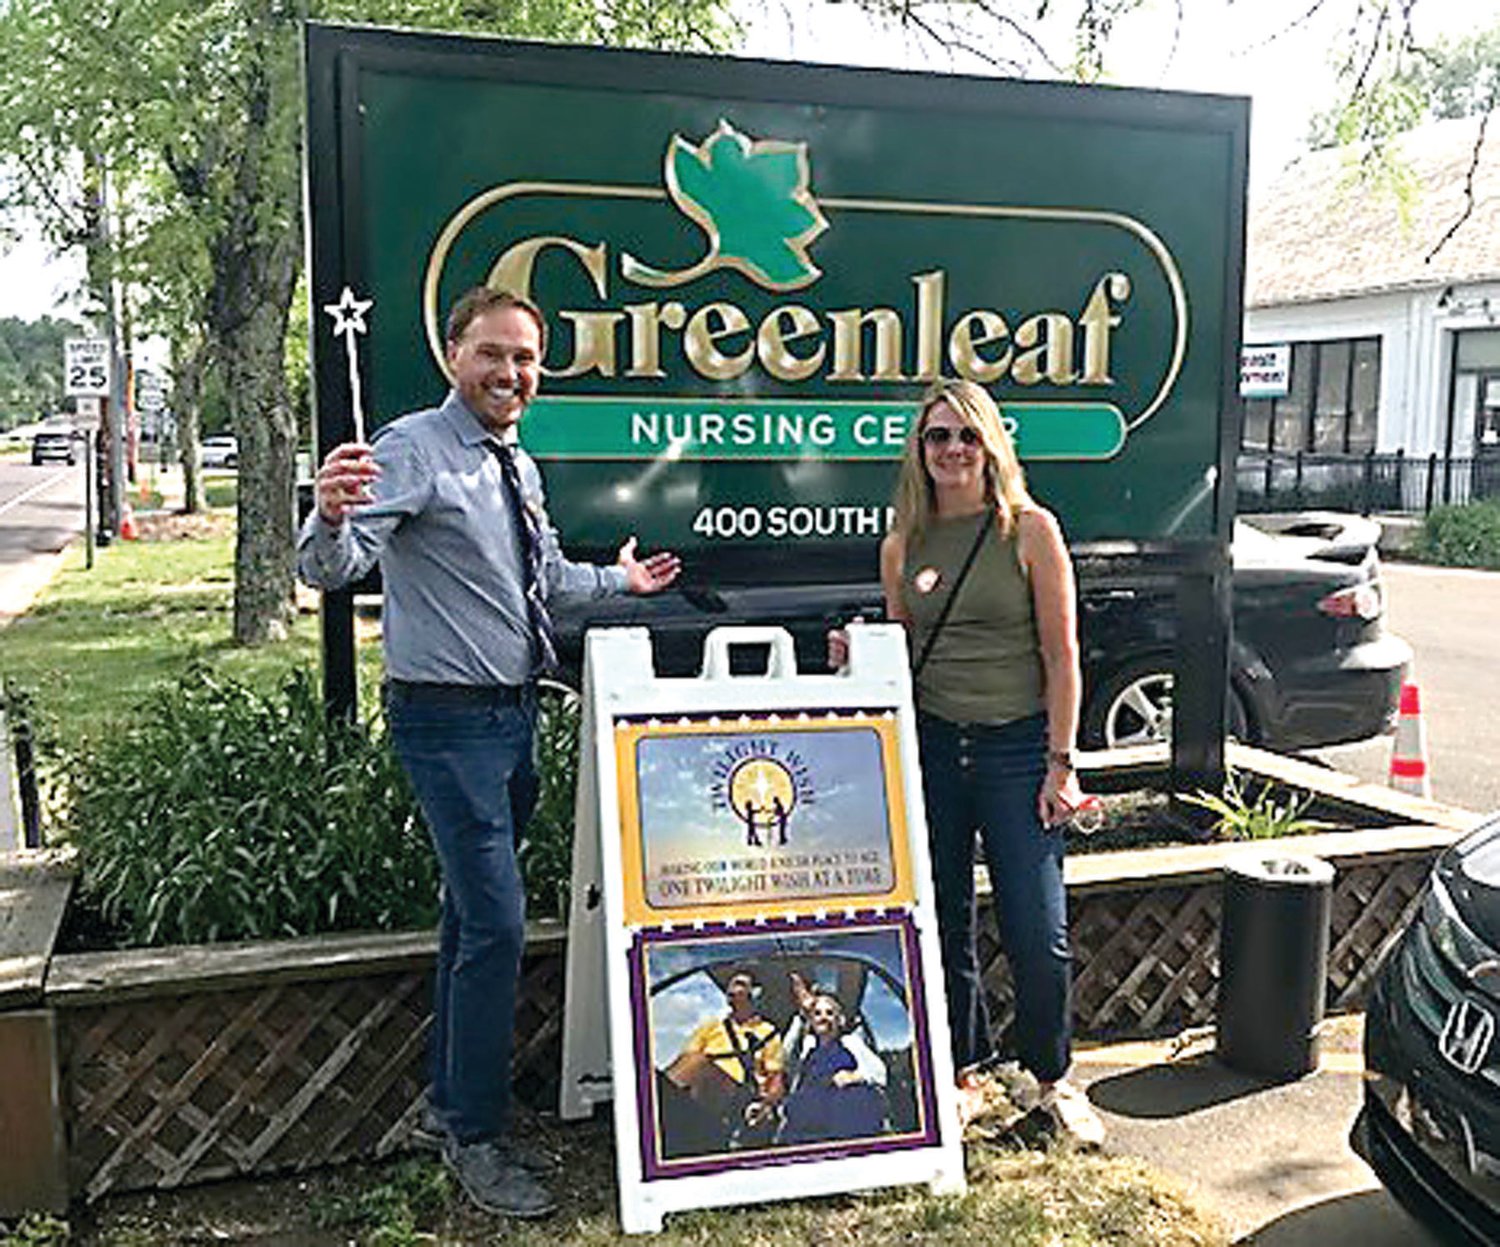 Twilight Wish Executive Director Brant Lingle and Director of Community Relations Mary Farrell outside Greenleaf Nursing.